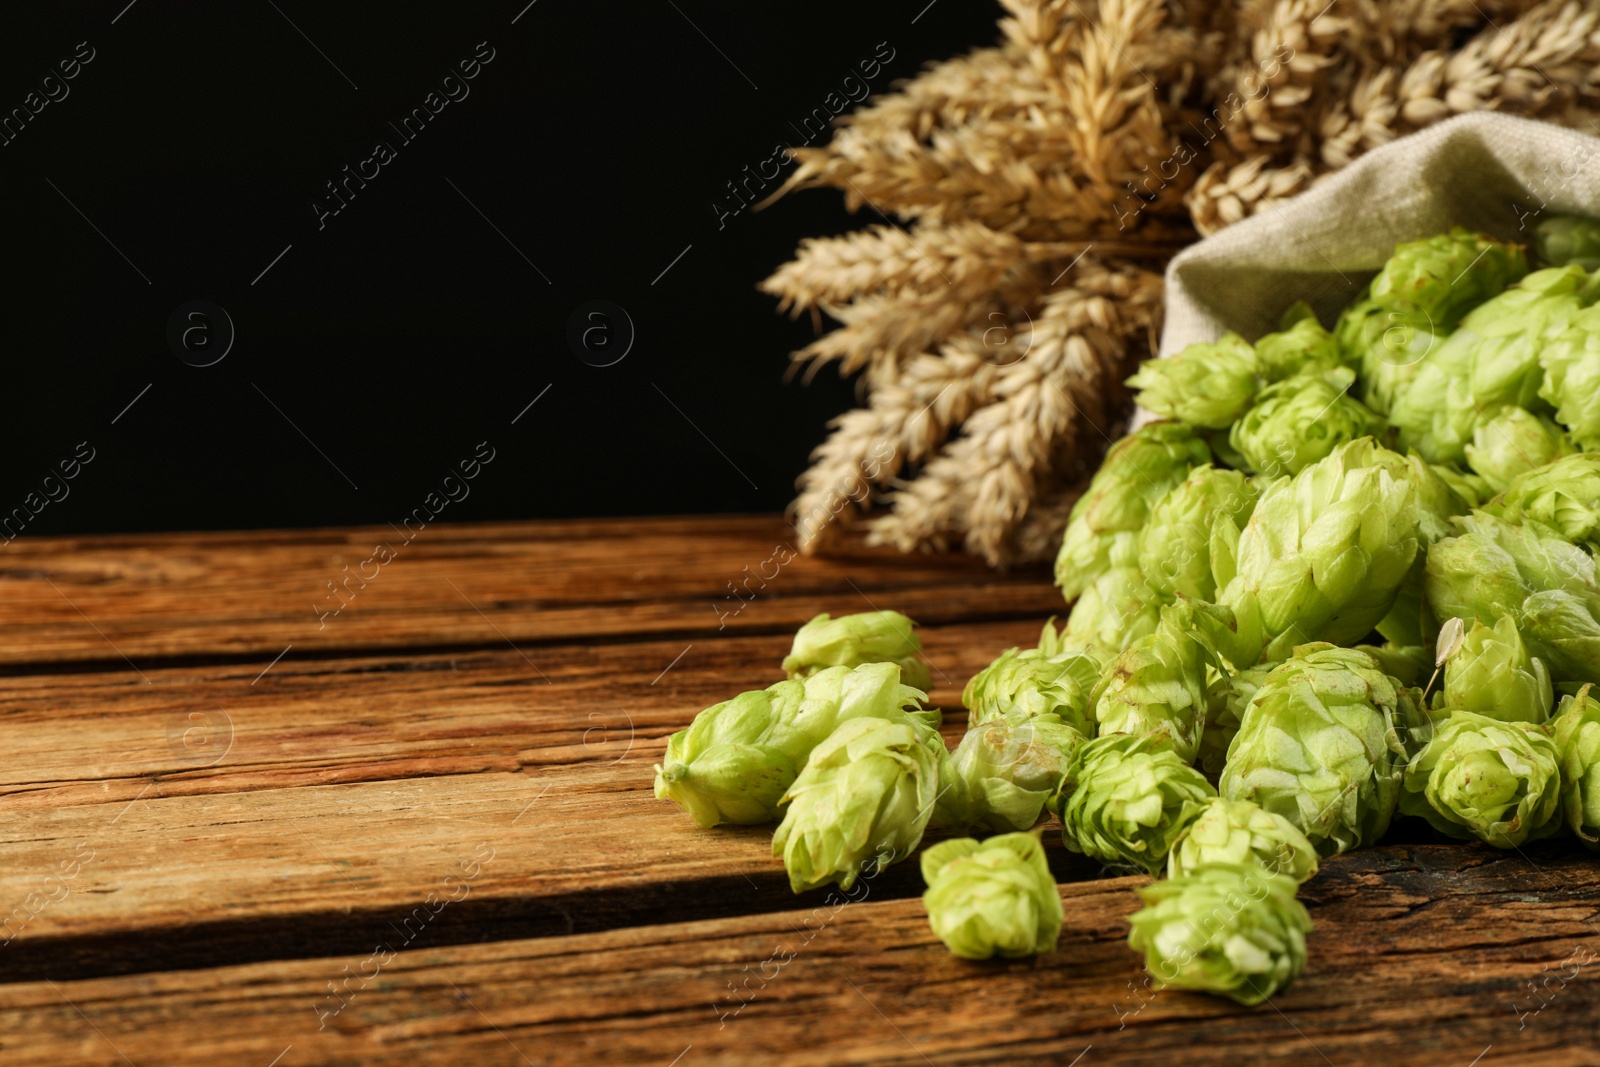 Photo of Overturned sack of hop flowers and wheat ears on wooden table against black background, space for text